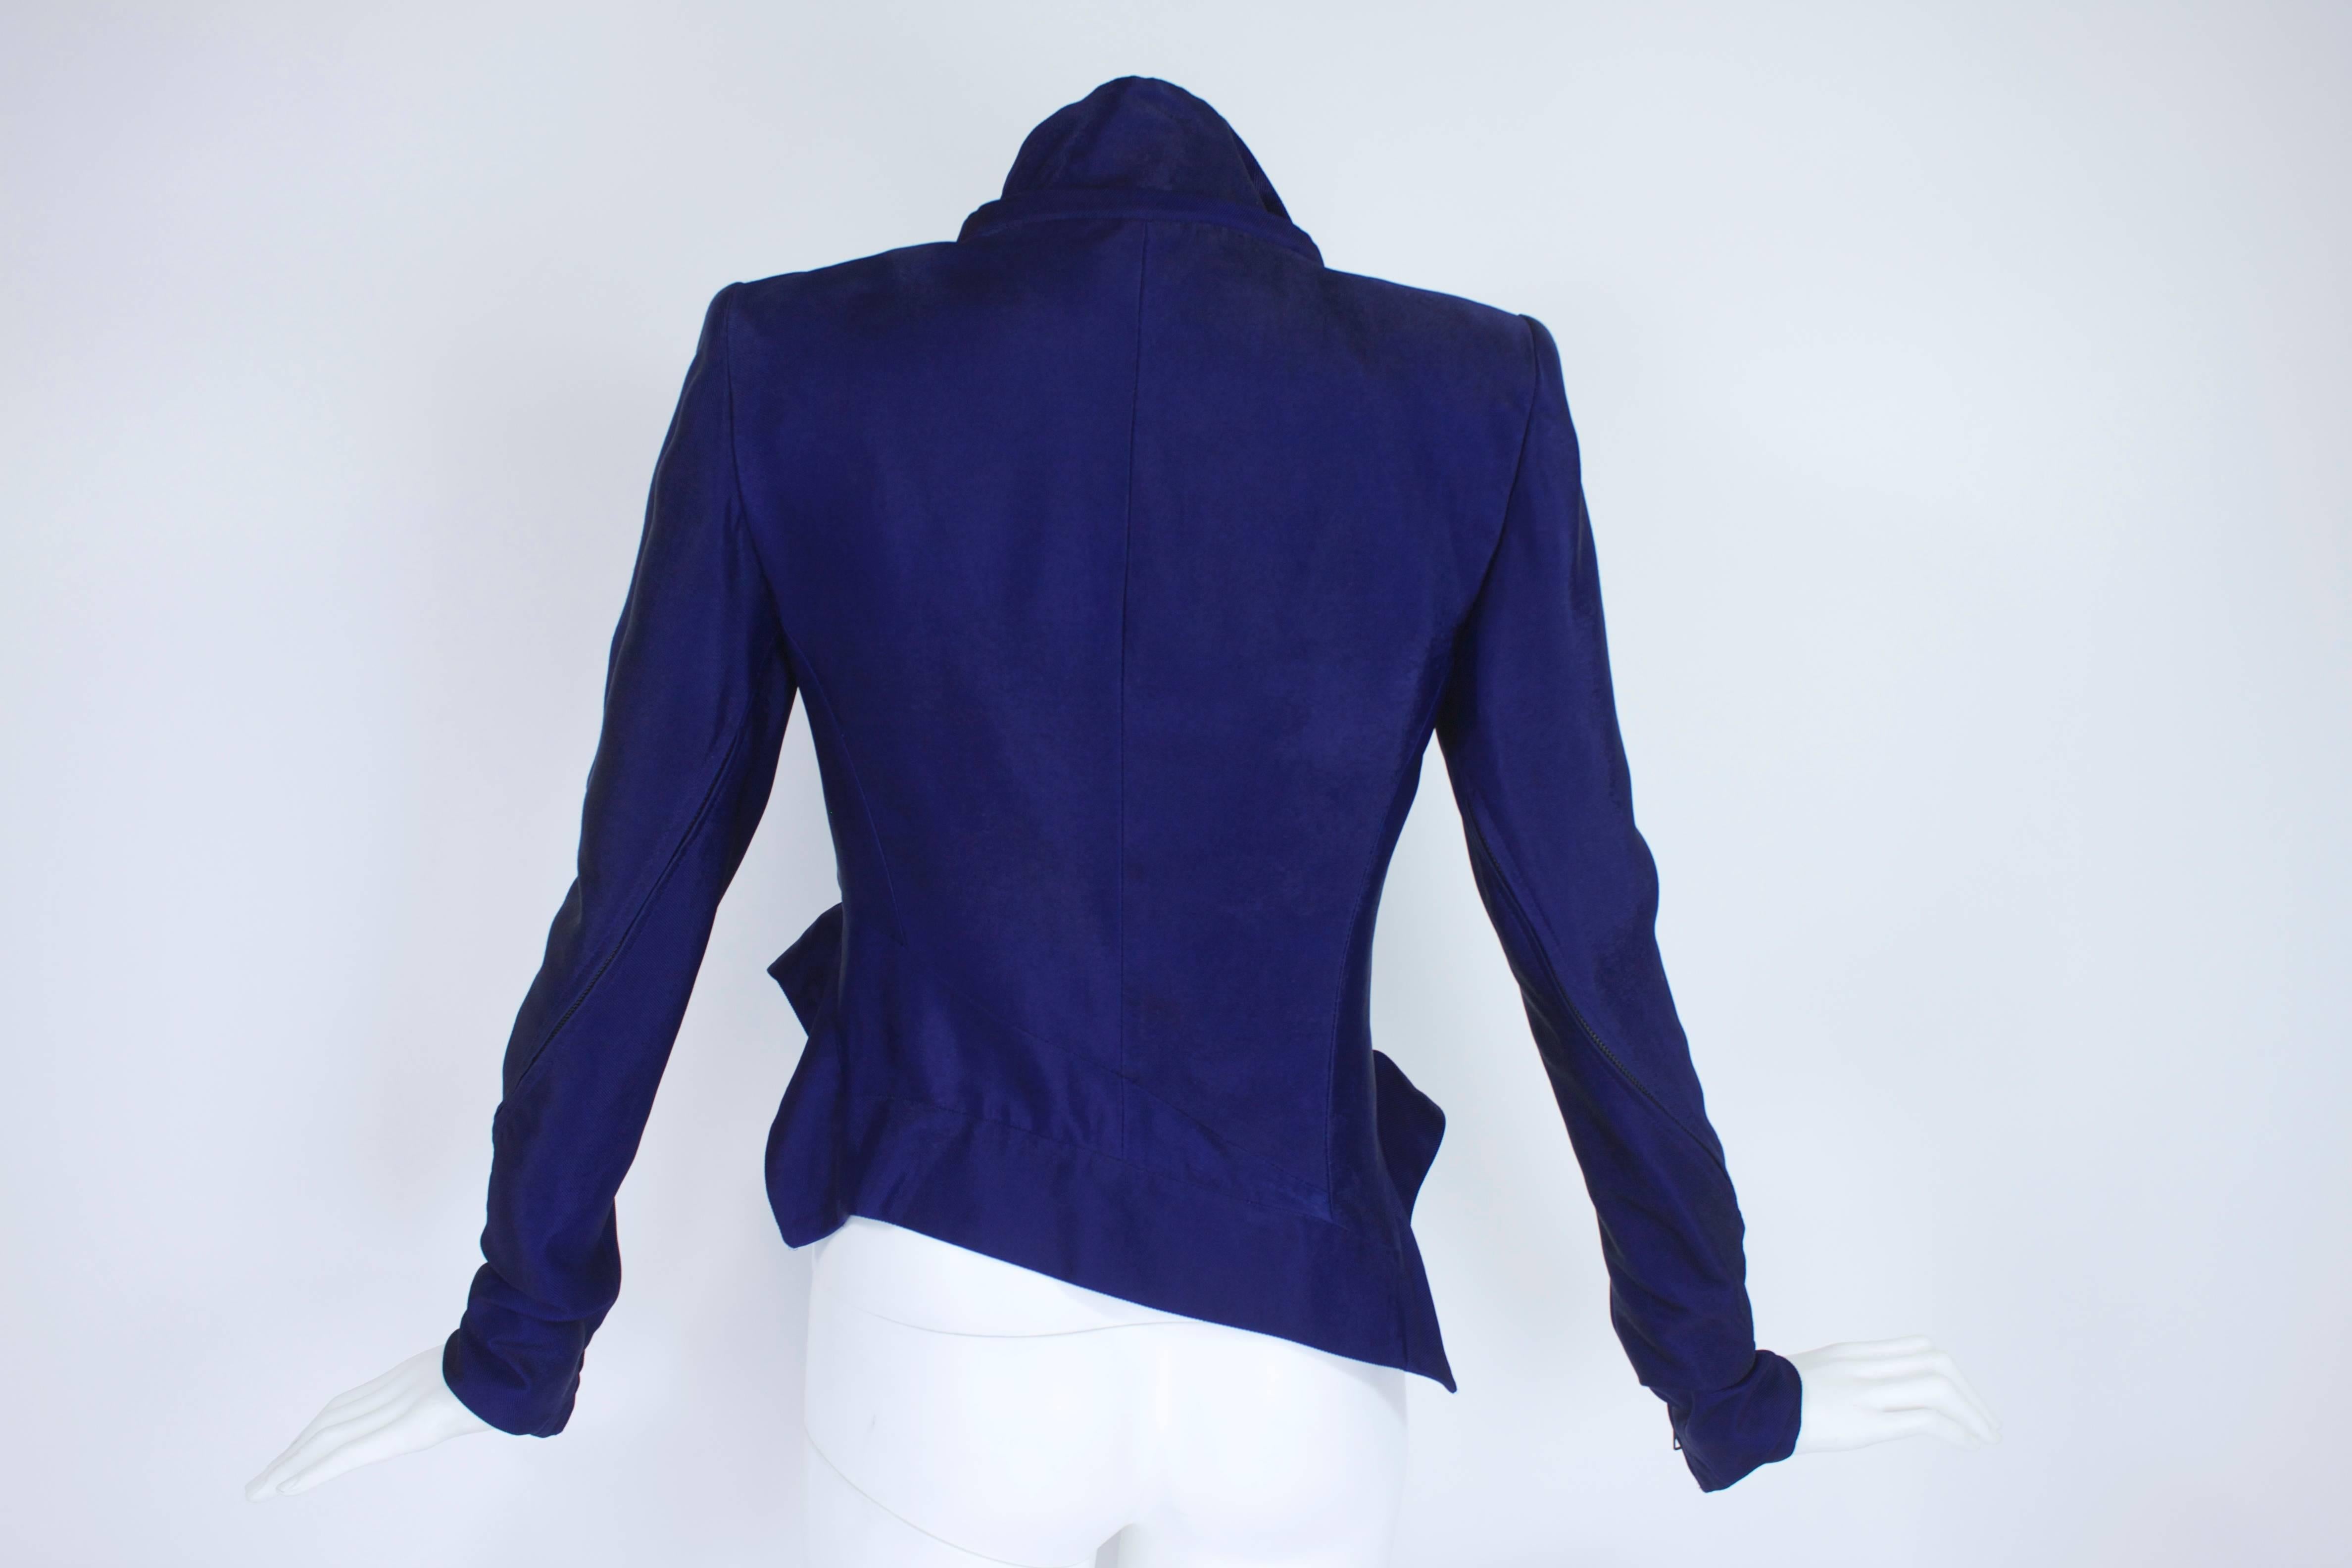 Ann Demeulemeester Asymmetrical Navy Moto Jacket with Zip Collar For Sale 2